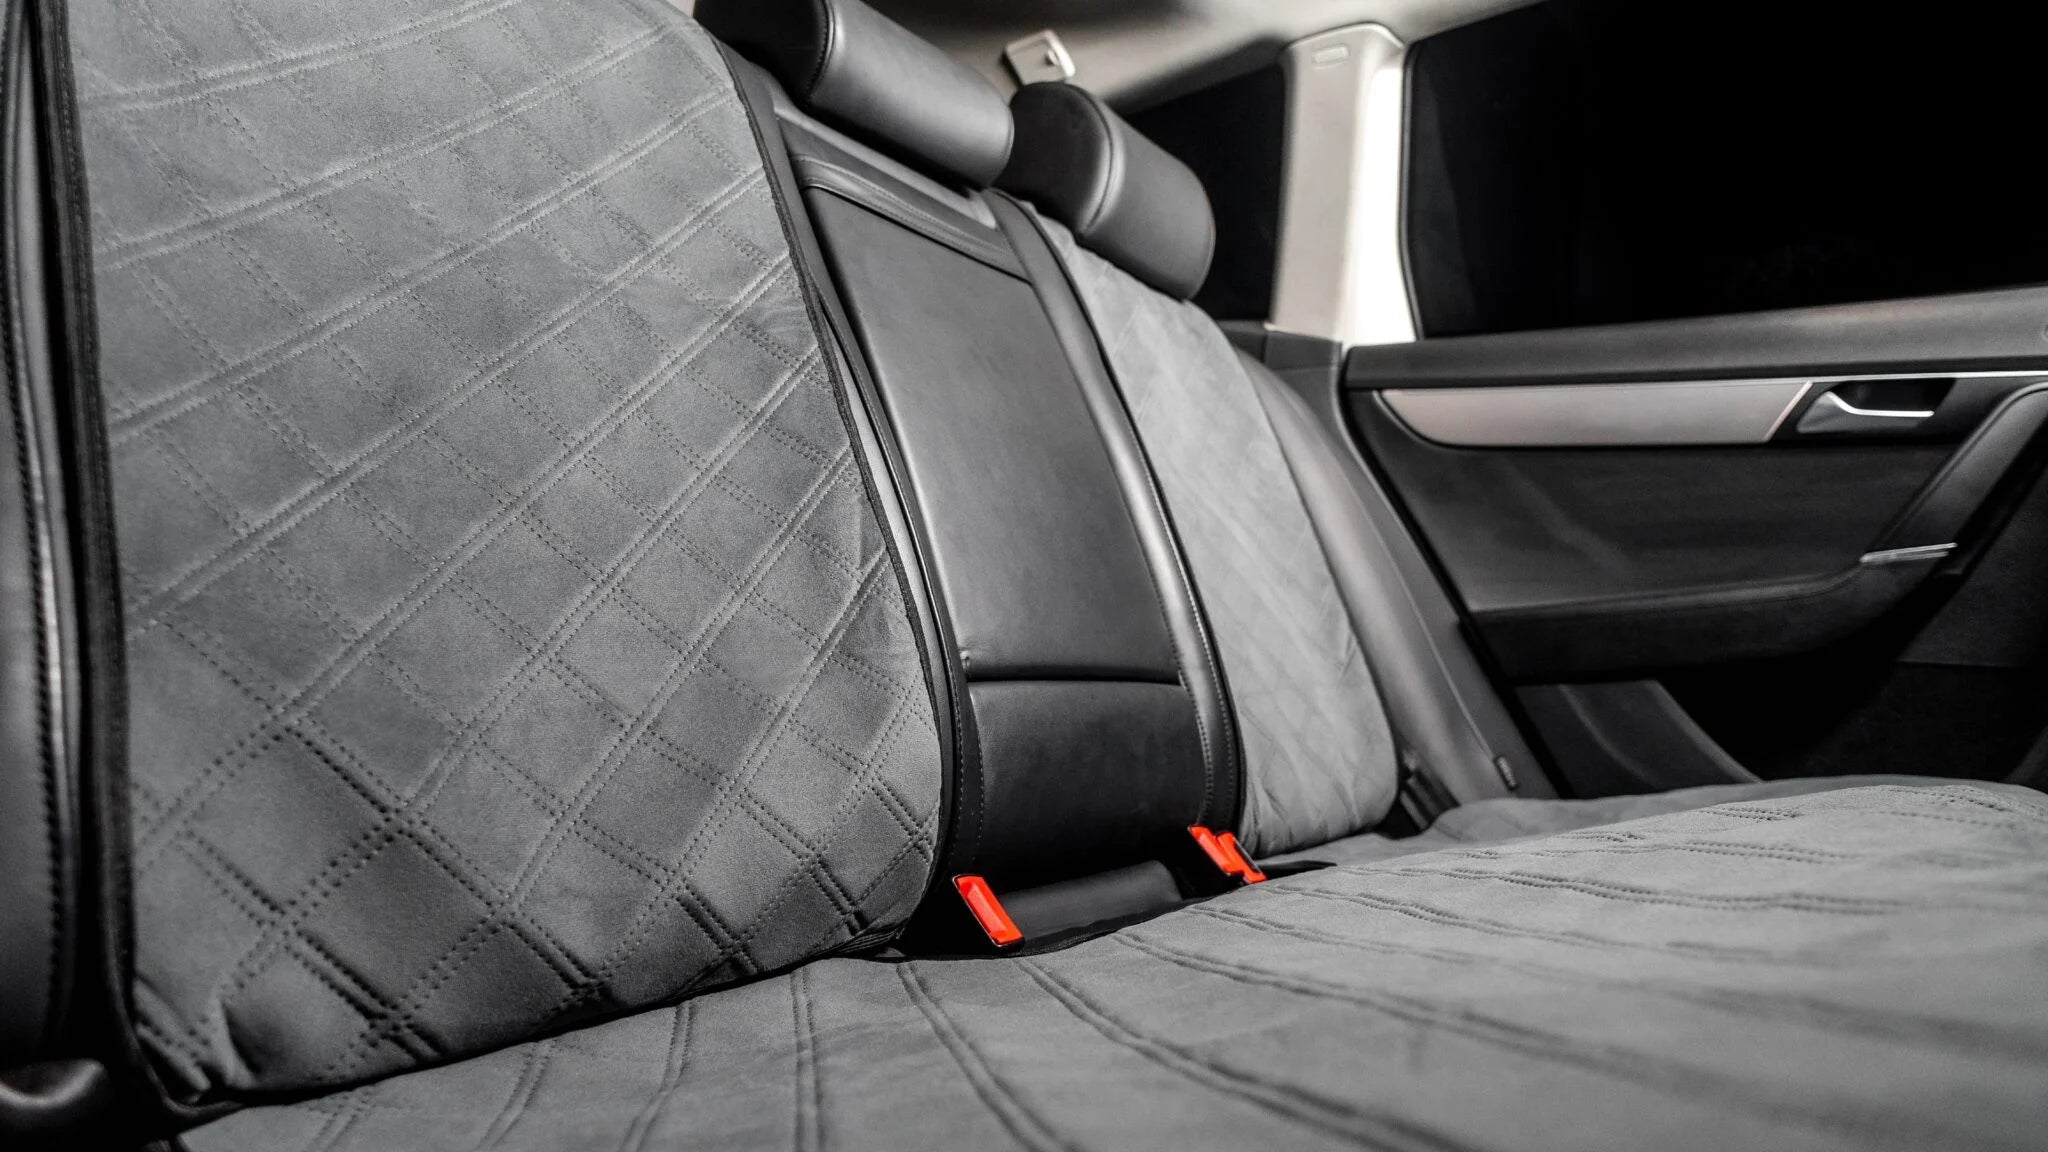 The Ultimate Guide to Choosing the Best Car Seat Cover for Leather Seats